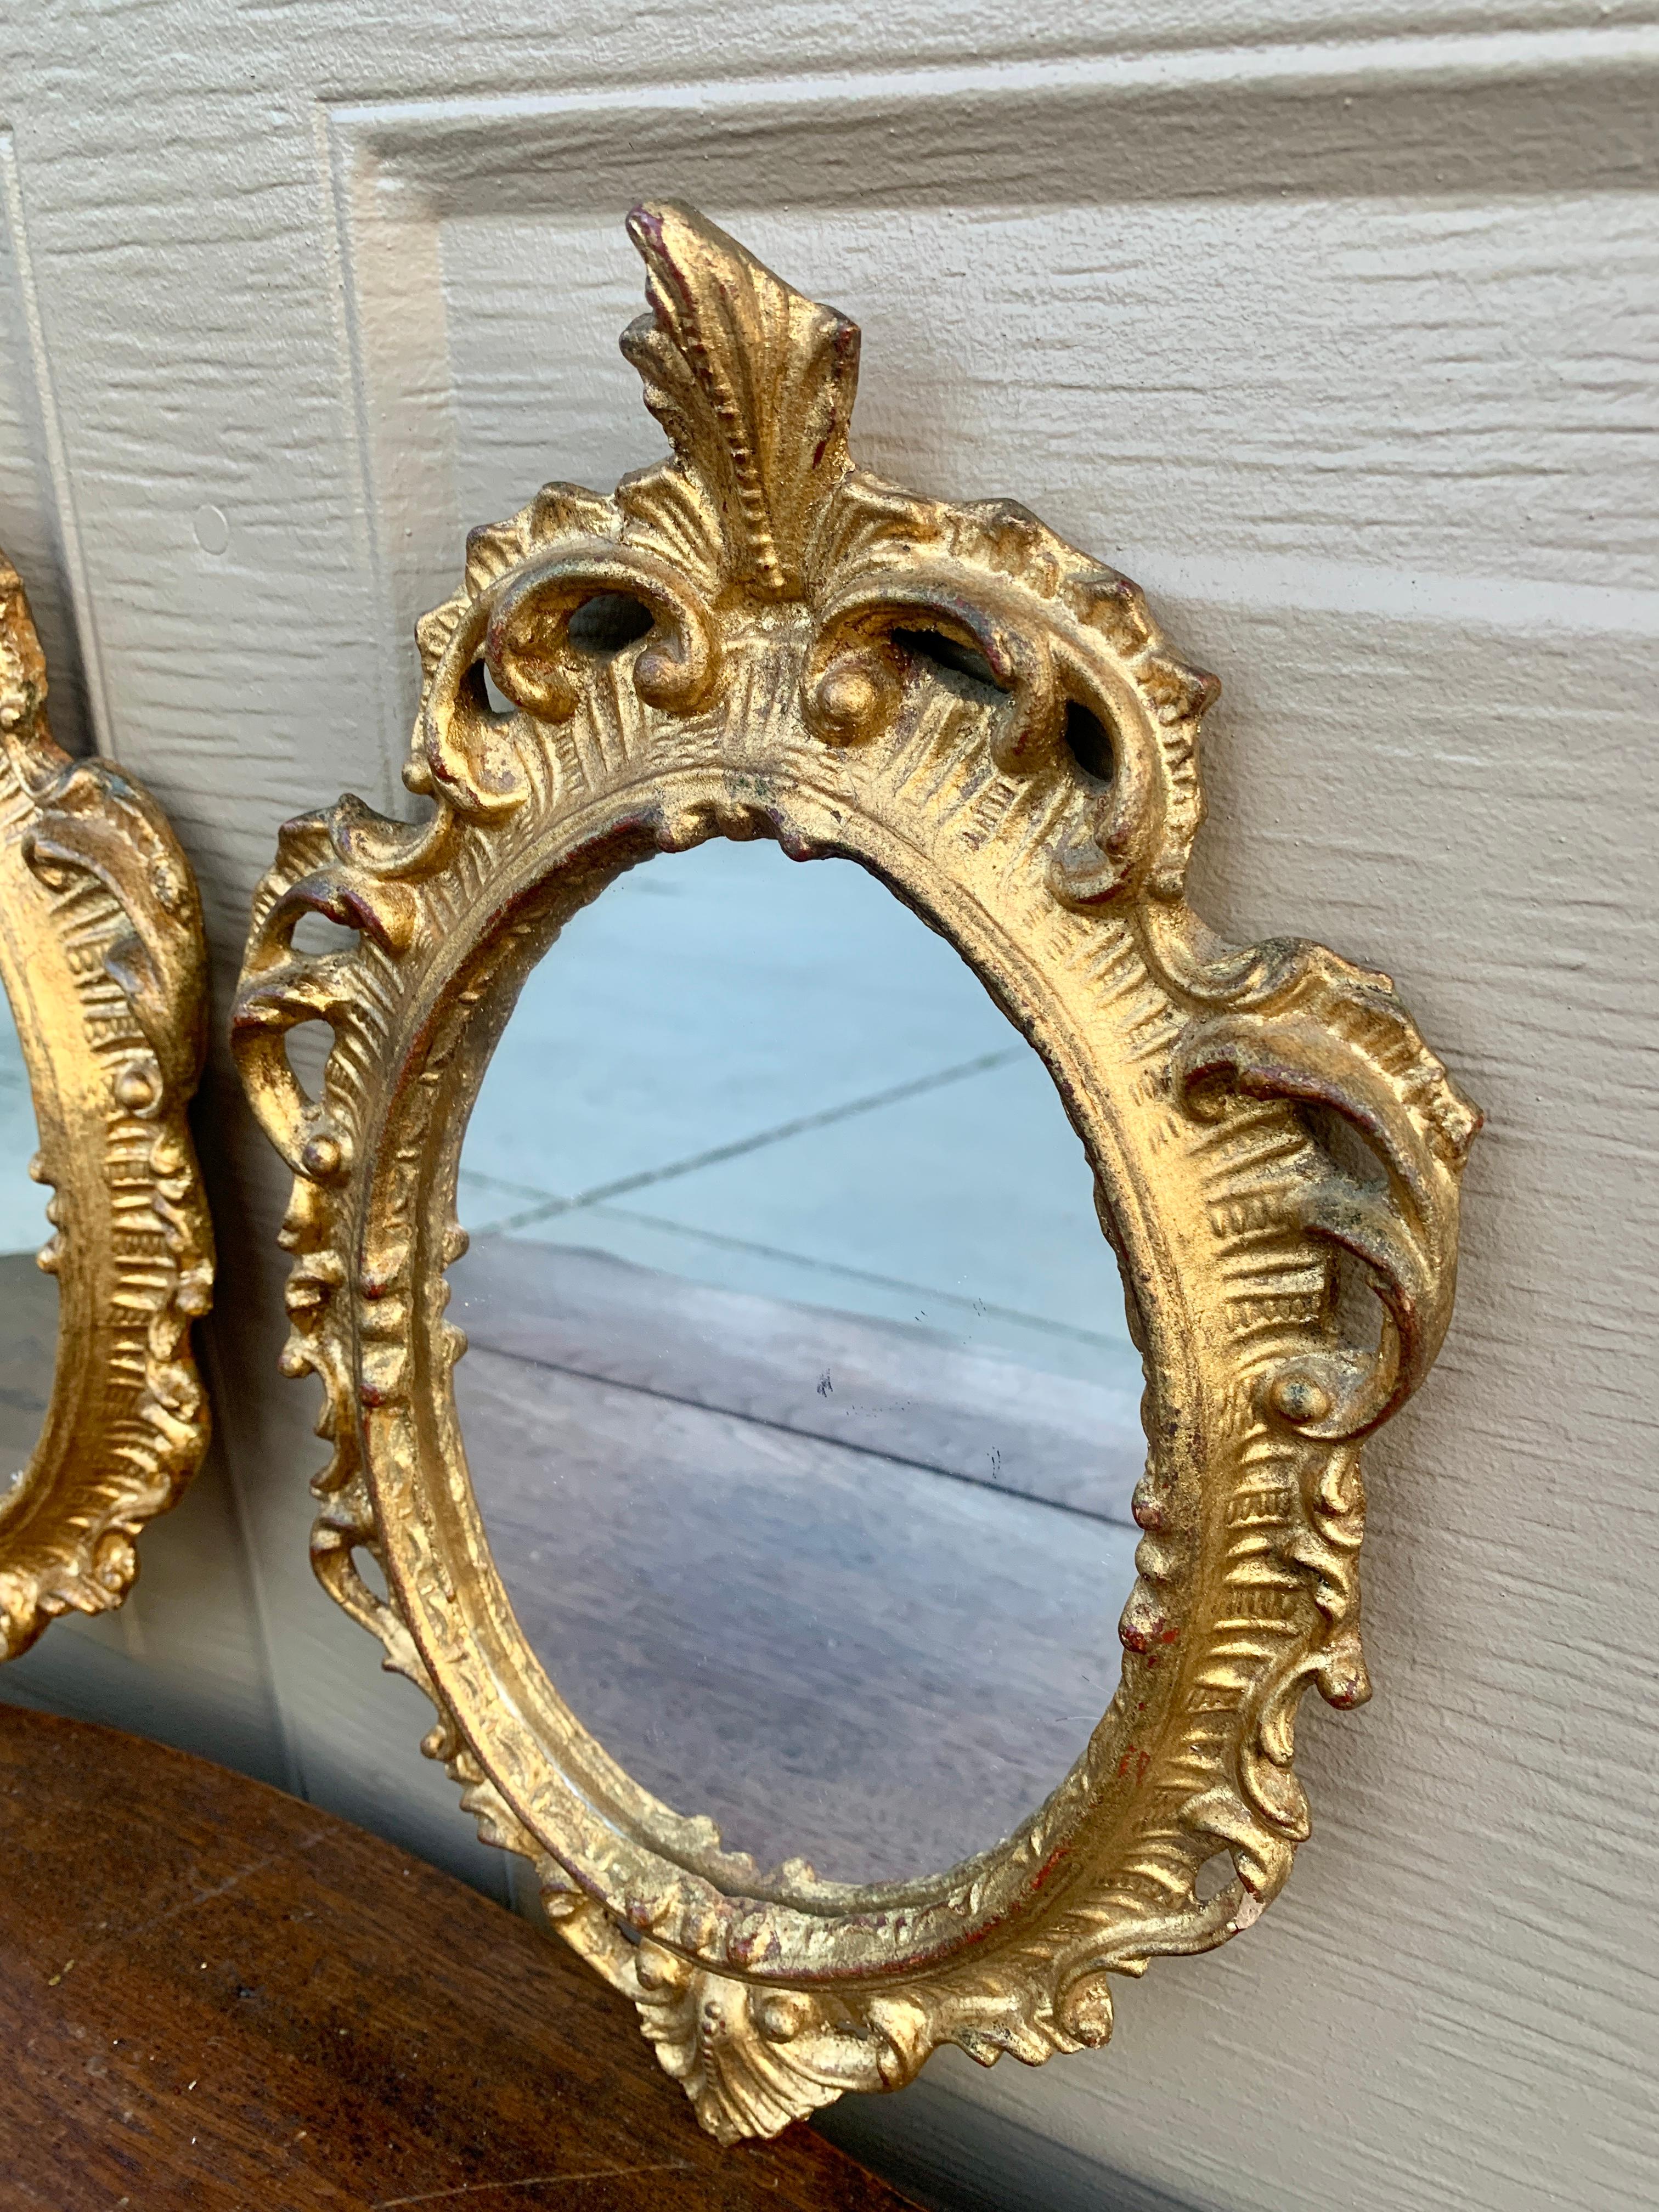 Mid-20th Century Italian Florentine Baroque Gold Giltwood Wall Mirrors, Pair For Sale